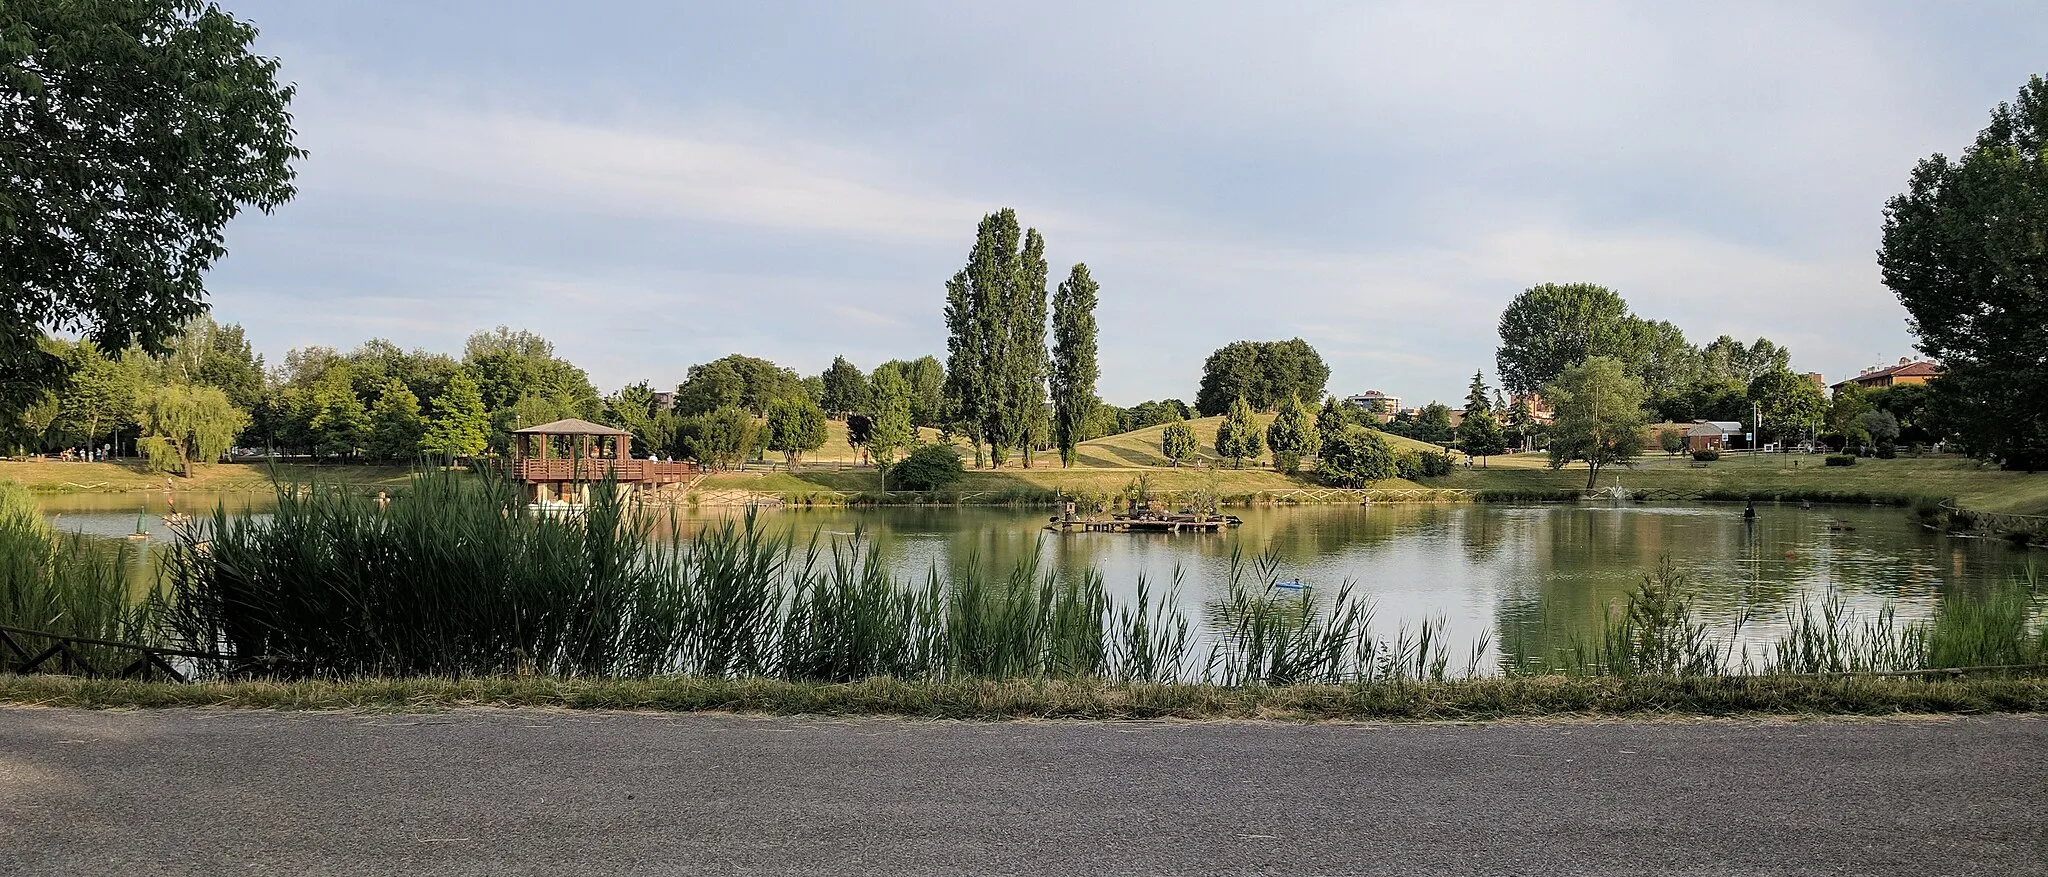 Photo showing: Picture of the artificial lake of "Via dei Giardini" Park in Bologna, Italy. A gazebo platform on the lake is visible.